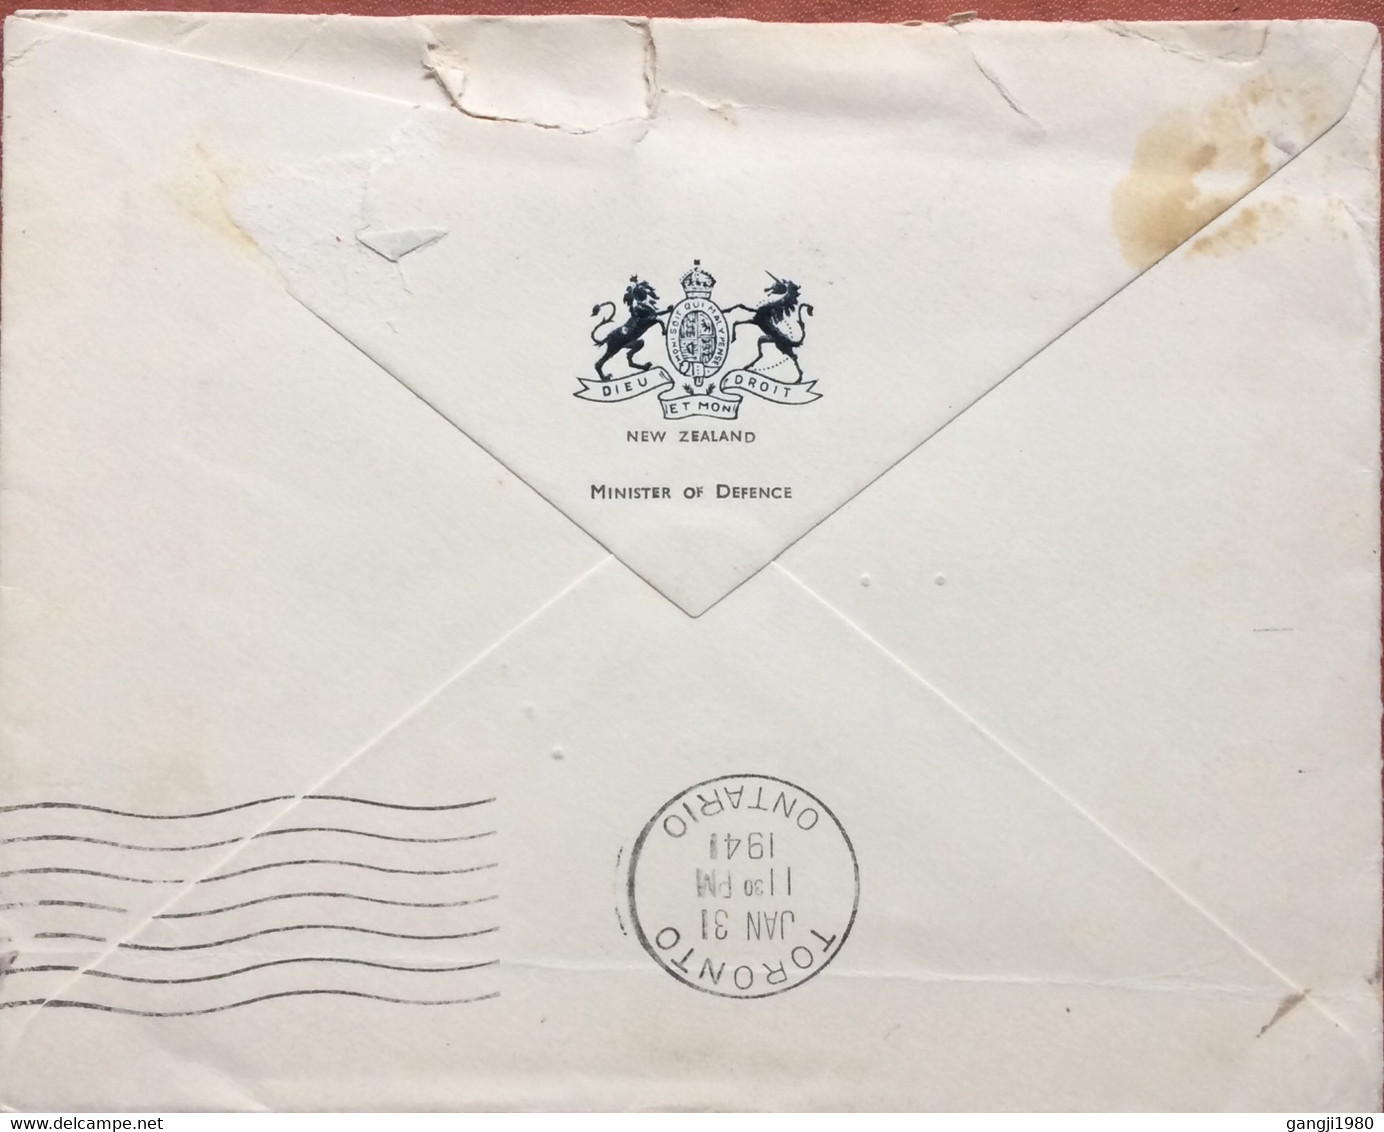 NEW ZEALAND 1941, COVER USED TO CANADA, MINISTRY OF DEFENCE ARM , HORSE & LION, TORONTO CITY CANCEL, WELINGTON, DO NOT W - Covers & Documents